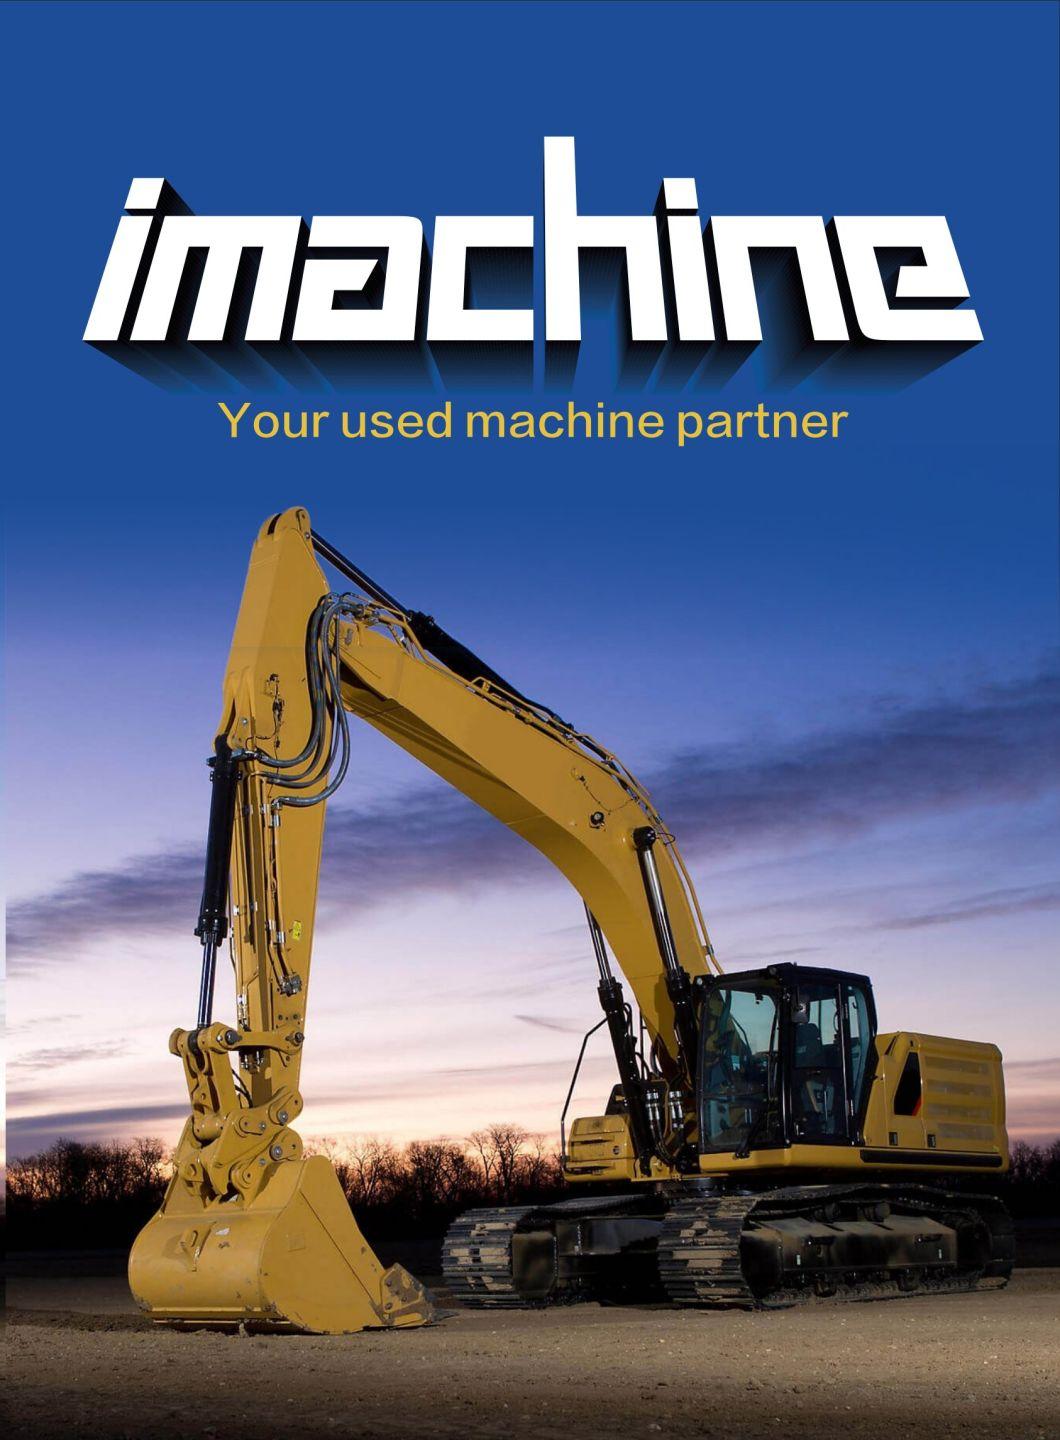 Secondhand Best Selling Hydraulic Machinery Cat 320d2 Medium Excavator in Good Condition for Sale